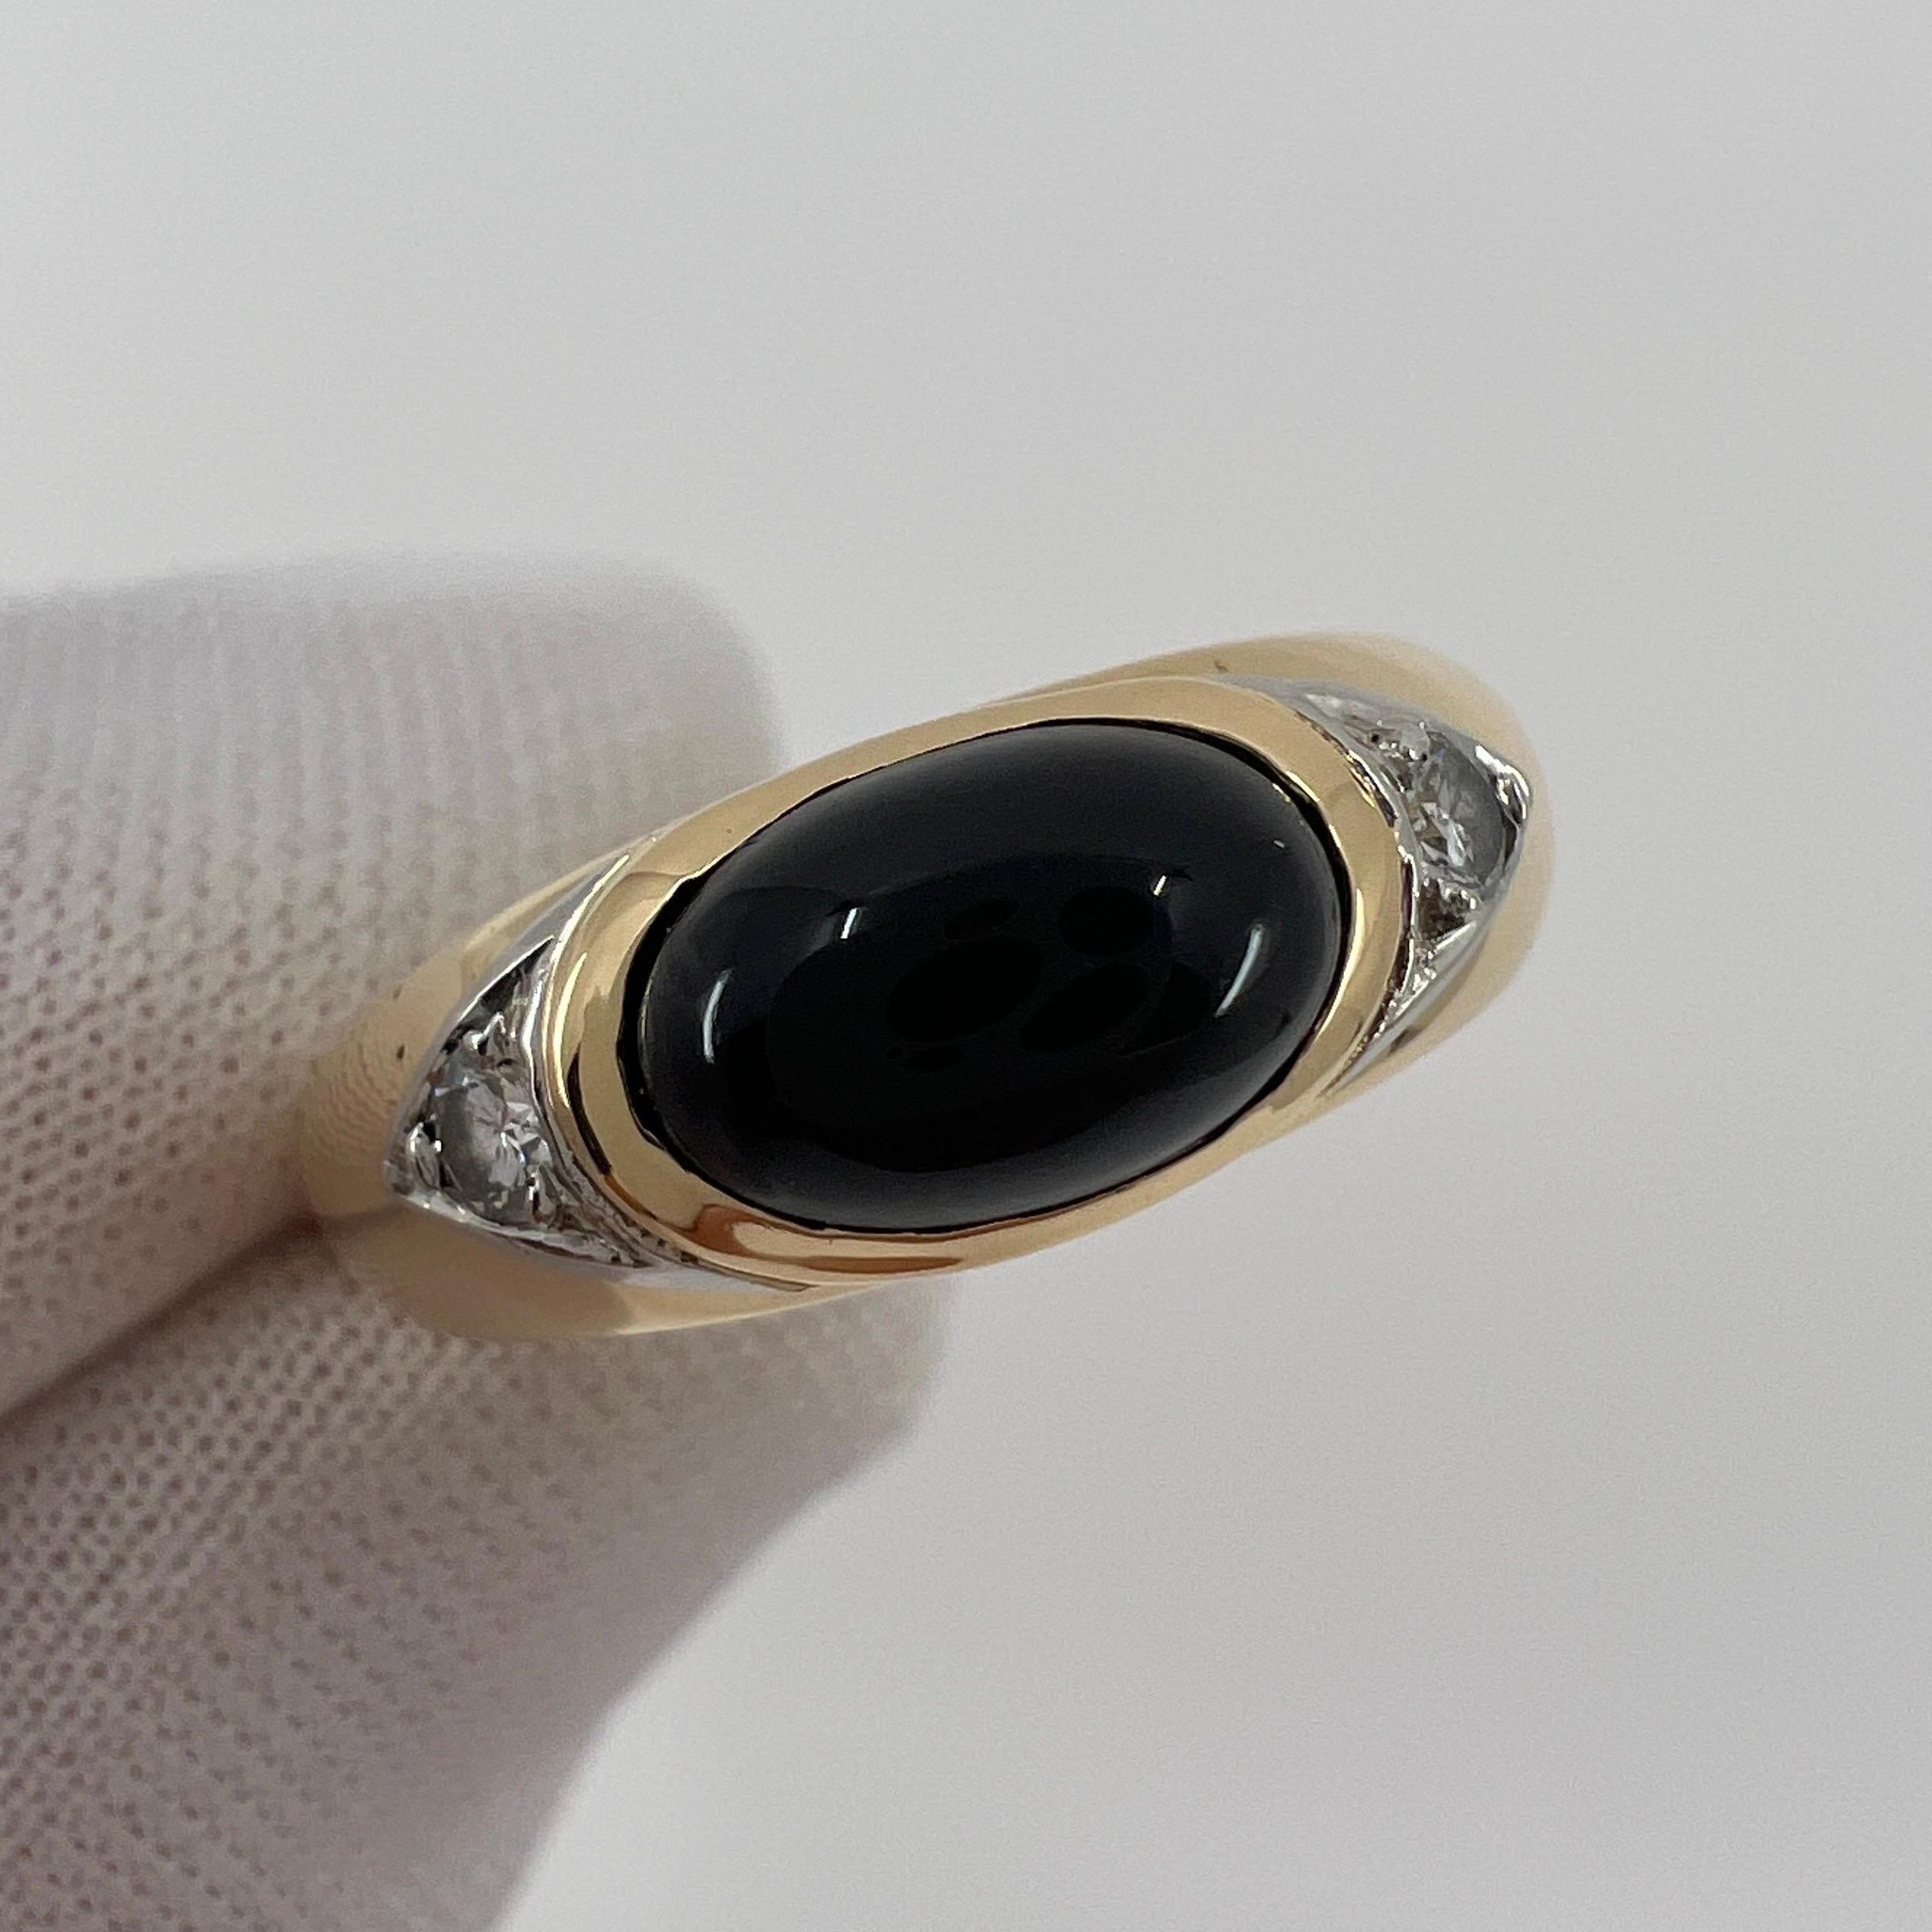 Very Rare Vintage Van Cleef & Arpels Onyx And Diamond 18 Karat Gold Dome Ring.

A stunning vintage (almost antique) ring by French fine jewellery house Van Cleef & Arpels. Combining 18k yellow and white gold, this piece is estimated to be over 50